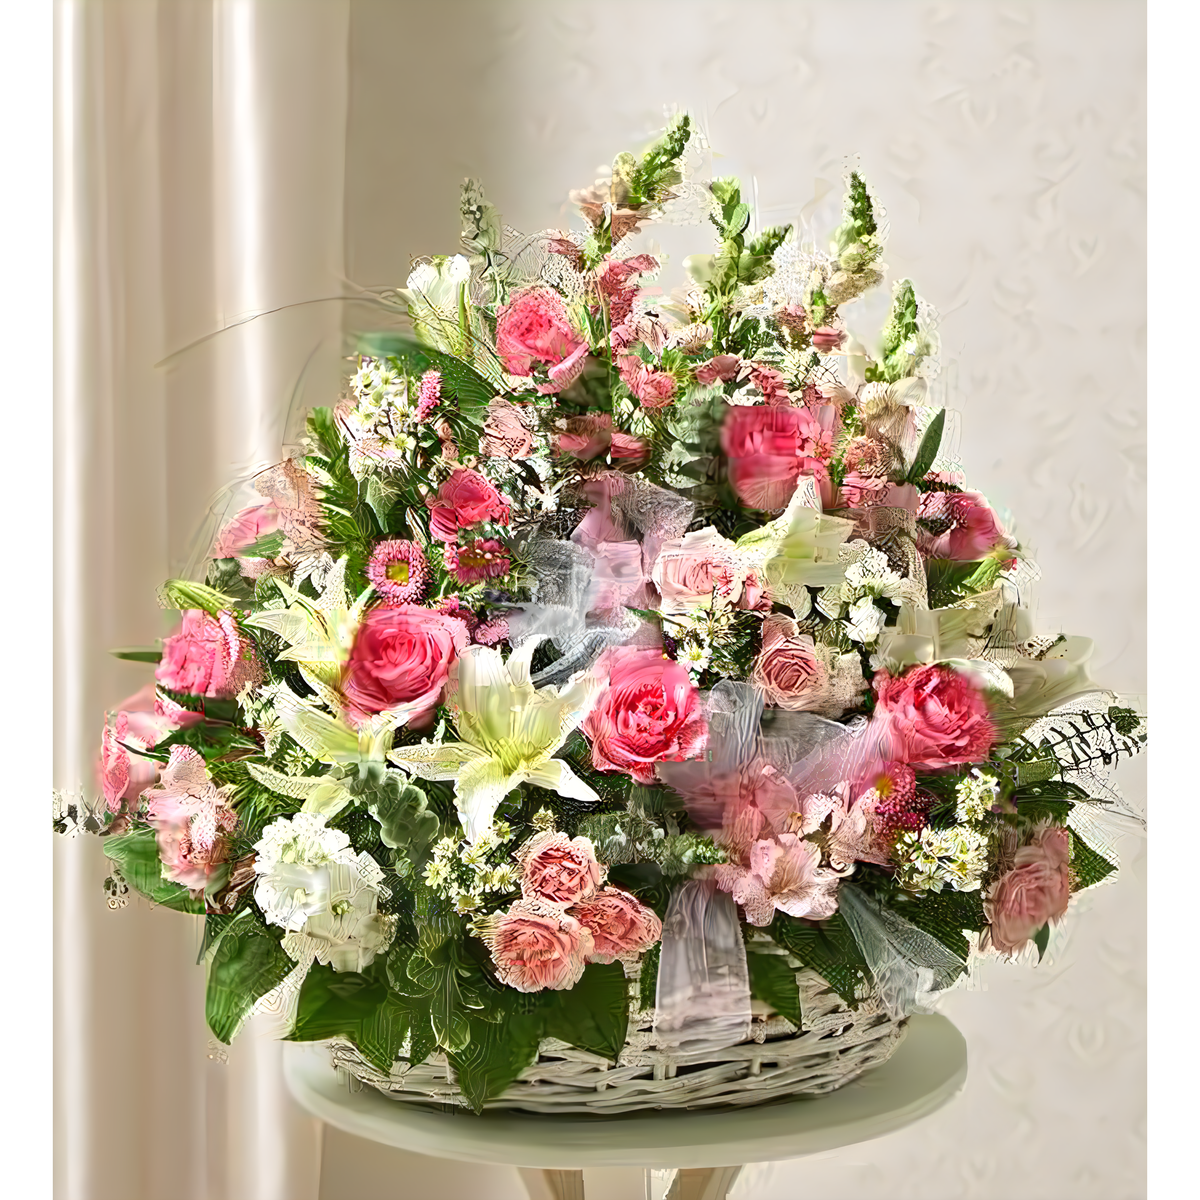 Pink and White Sympathy Arrangement in Basket - Funeral &gt; For the Service